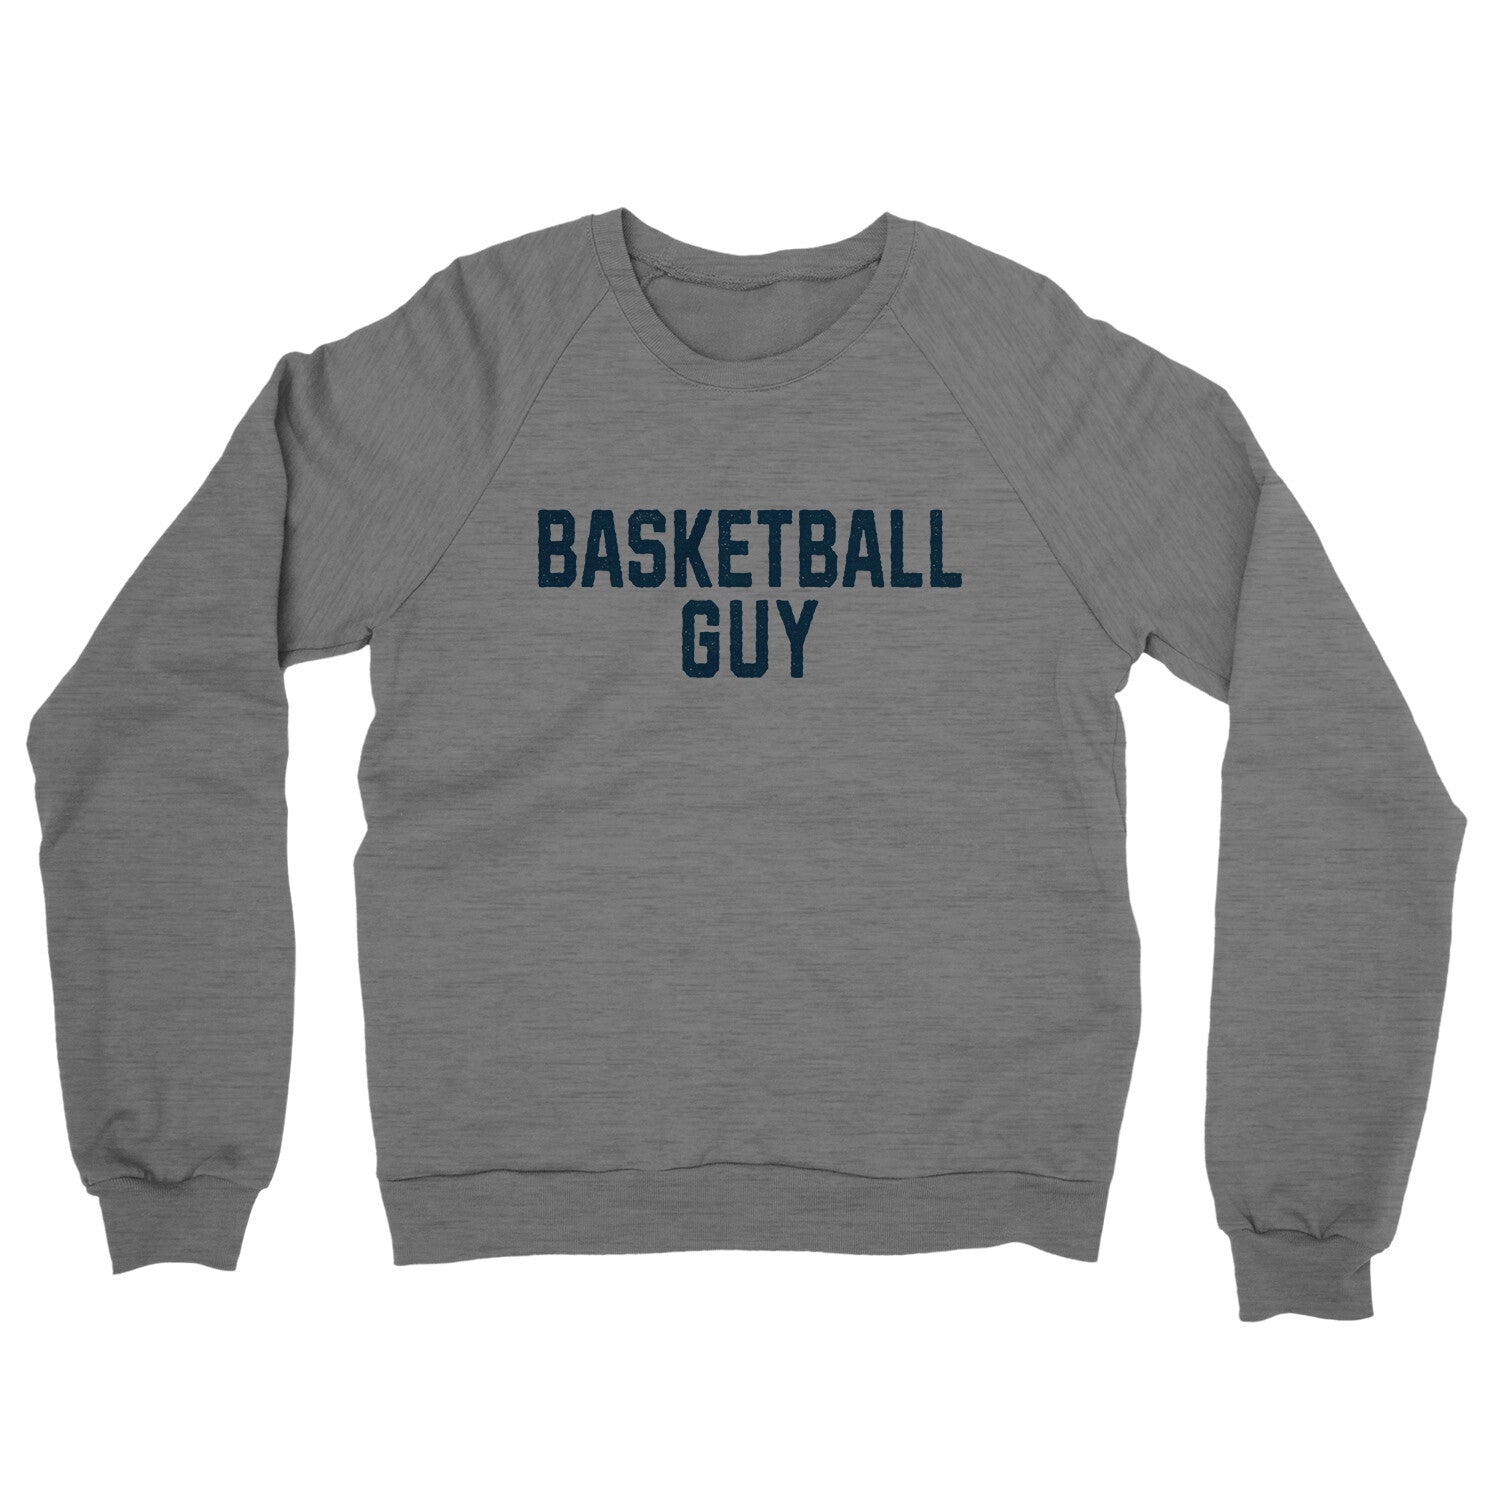 Basketball Guy in Graphite Heather Color